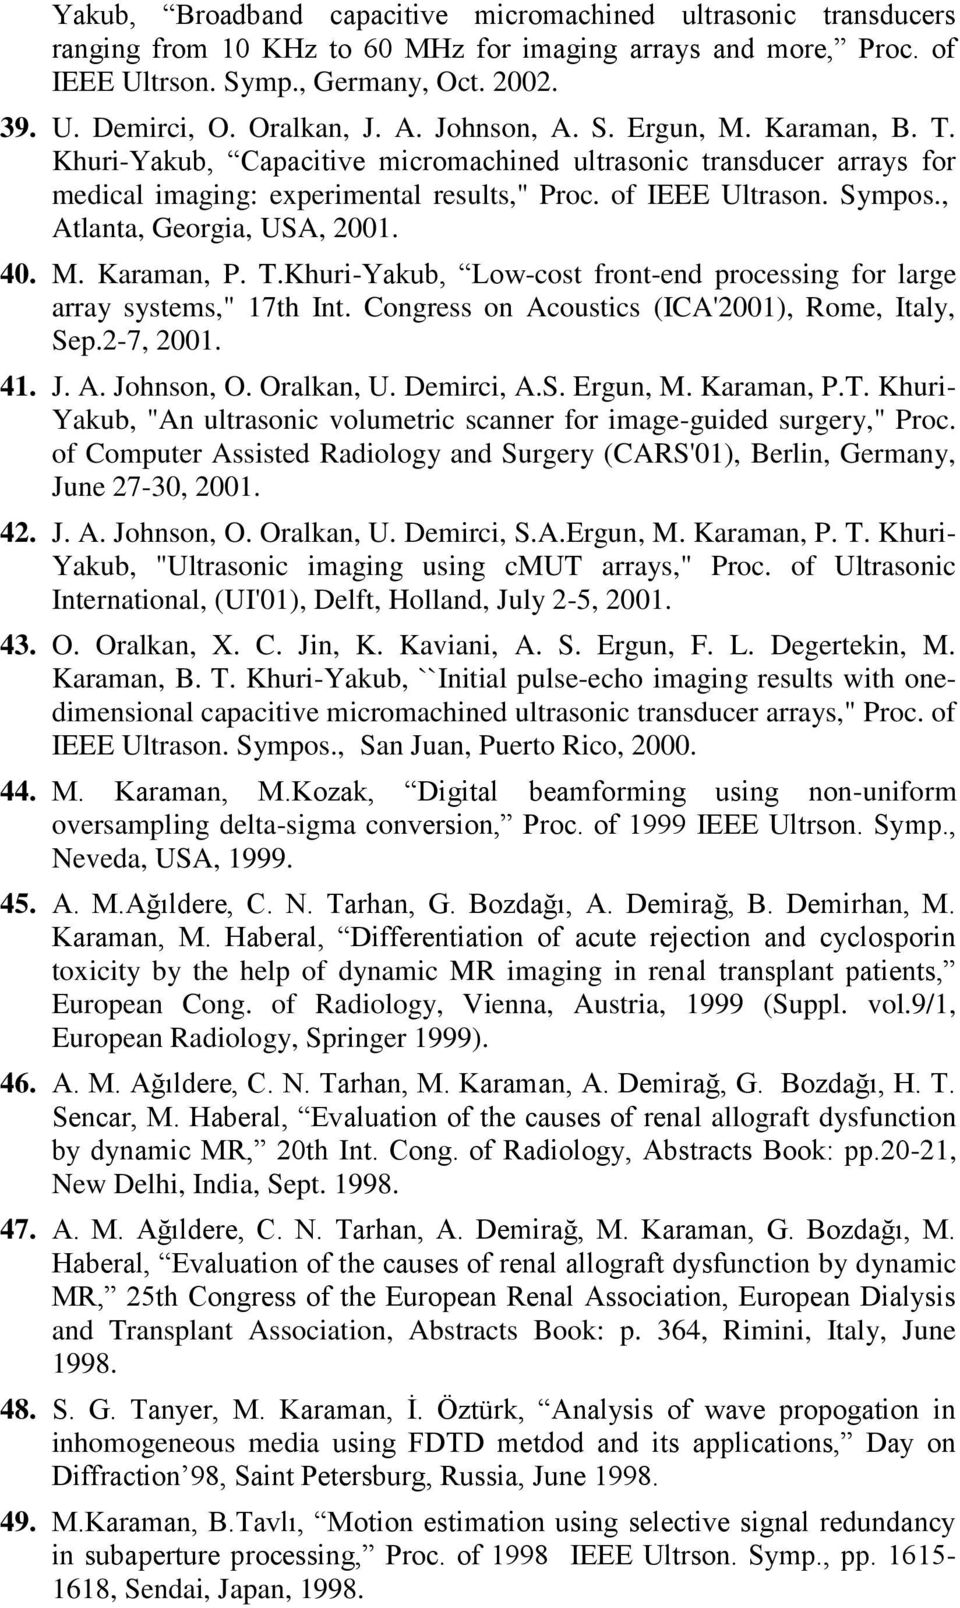 , Atlanta, Georgia, USA, 2001. 40. M. Karaman, P. T.Khuri-Yakub, Low-cost front-end processing for large array systems," 17th Int. Congress on Acoustics (ICA'2001), Rome, Italy, Sep.2-7, 2001. 41. J.